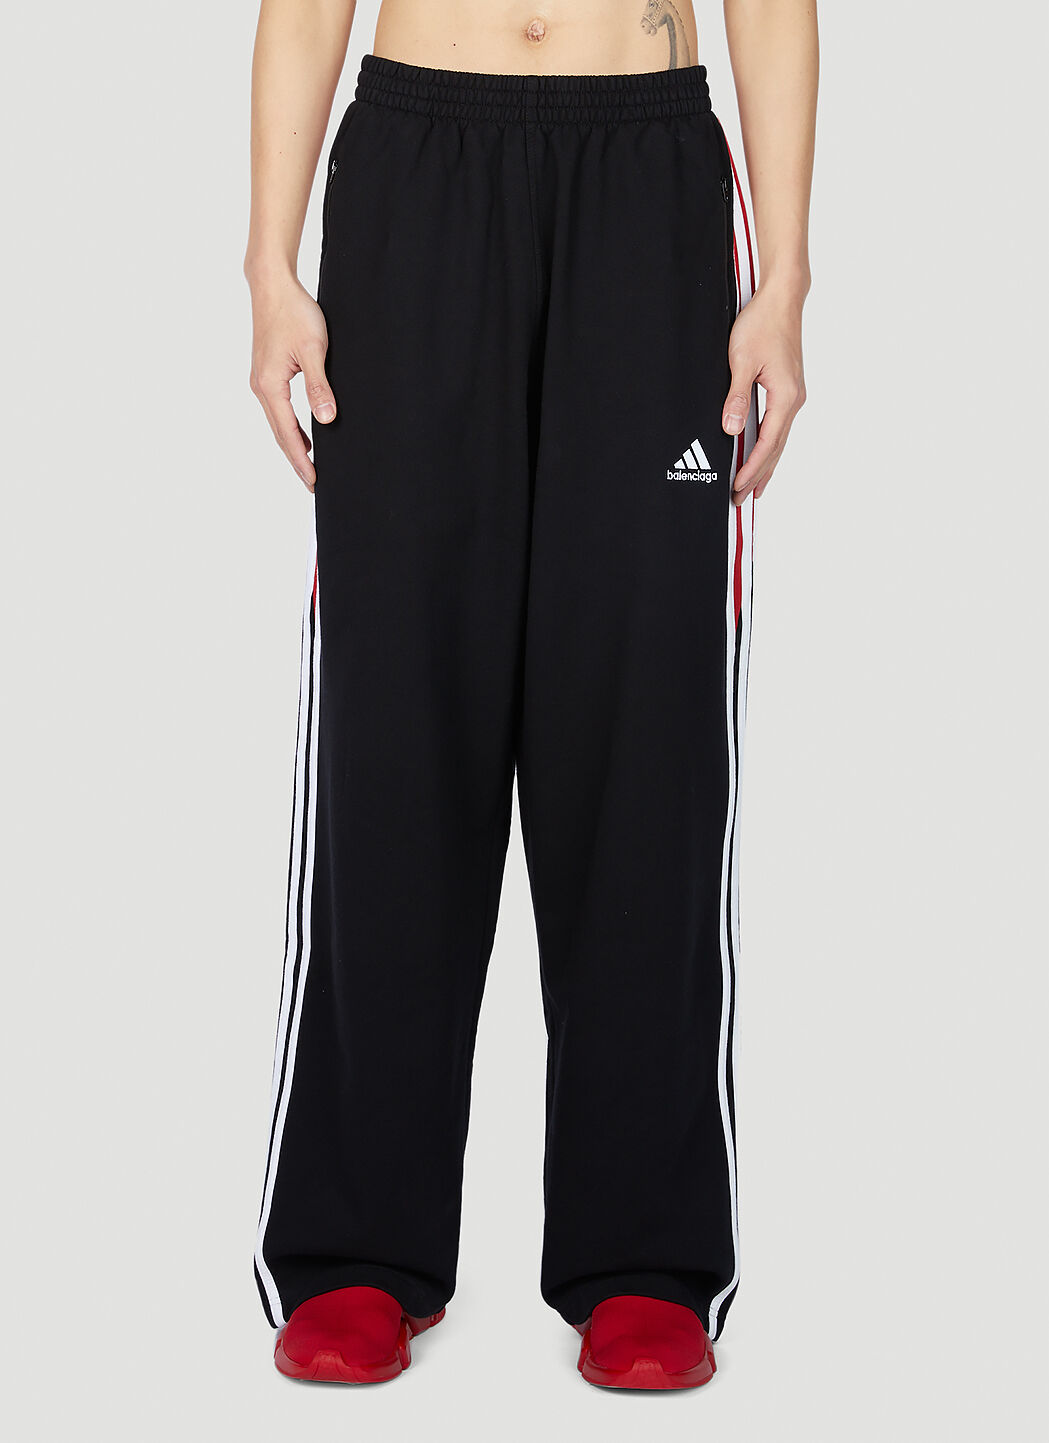 Adidas Team Issue Fleece Tapered Pants, Men's Fashion, Bottoms, Trousers on  Carousell